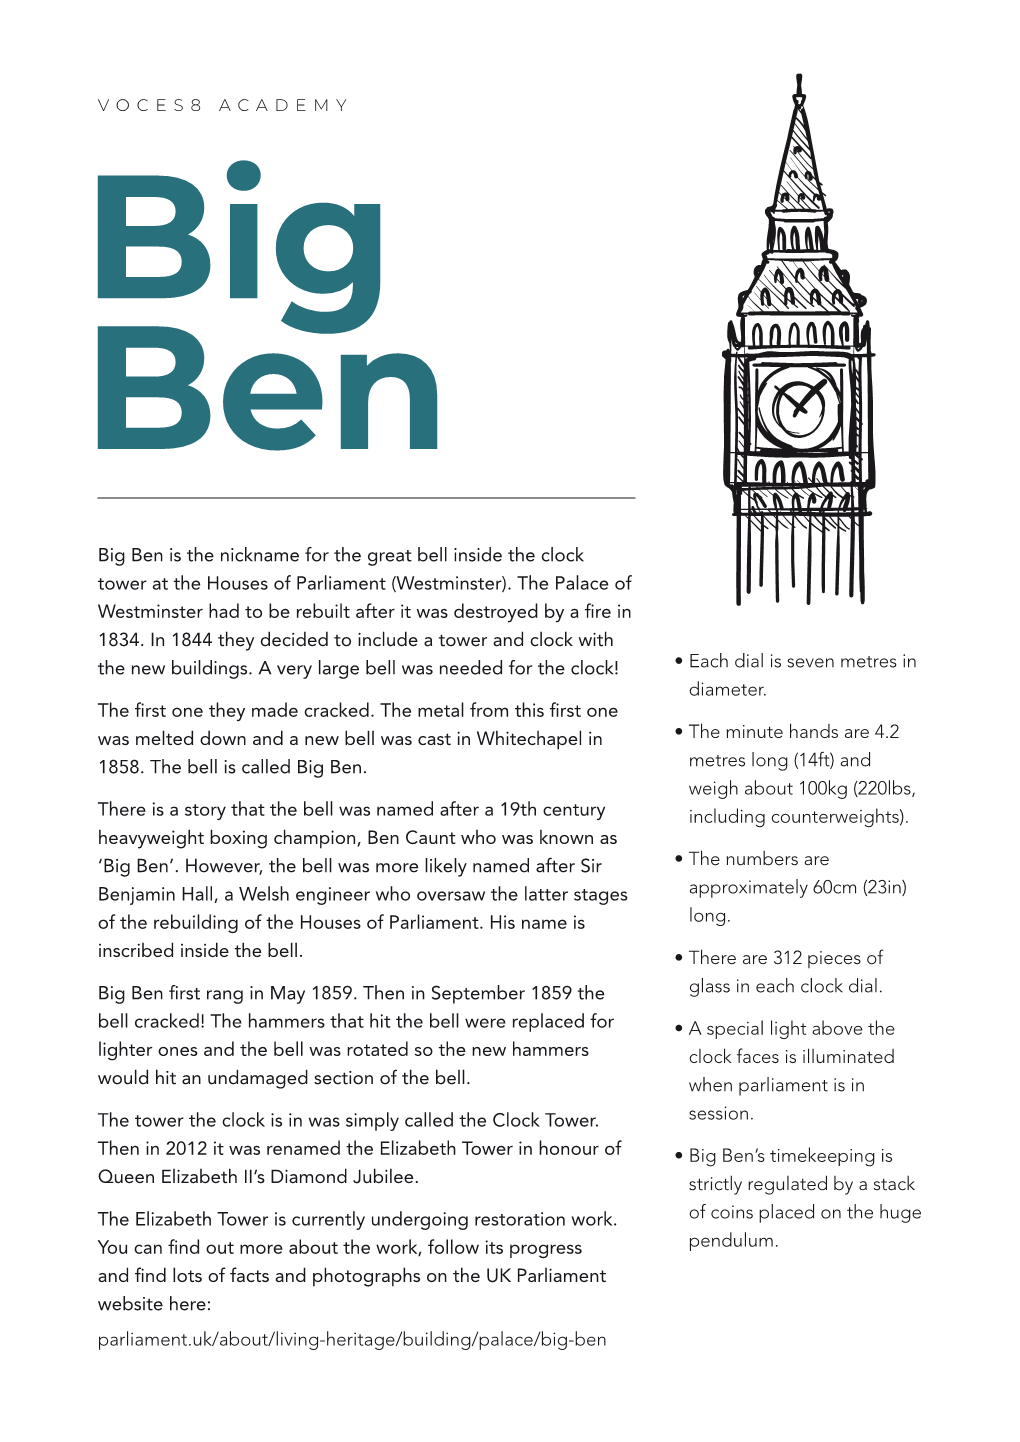 Big Ben Is the Nickname for the Great Bell Inside the Clock Tower at the Houses of Parliament (Westminster)